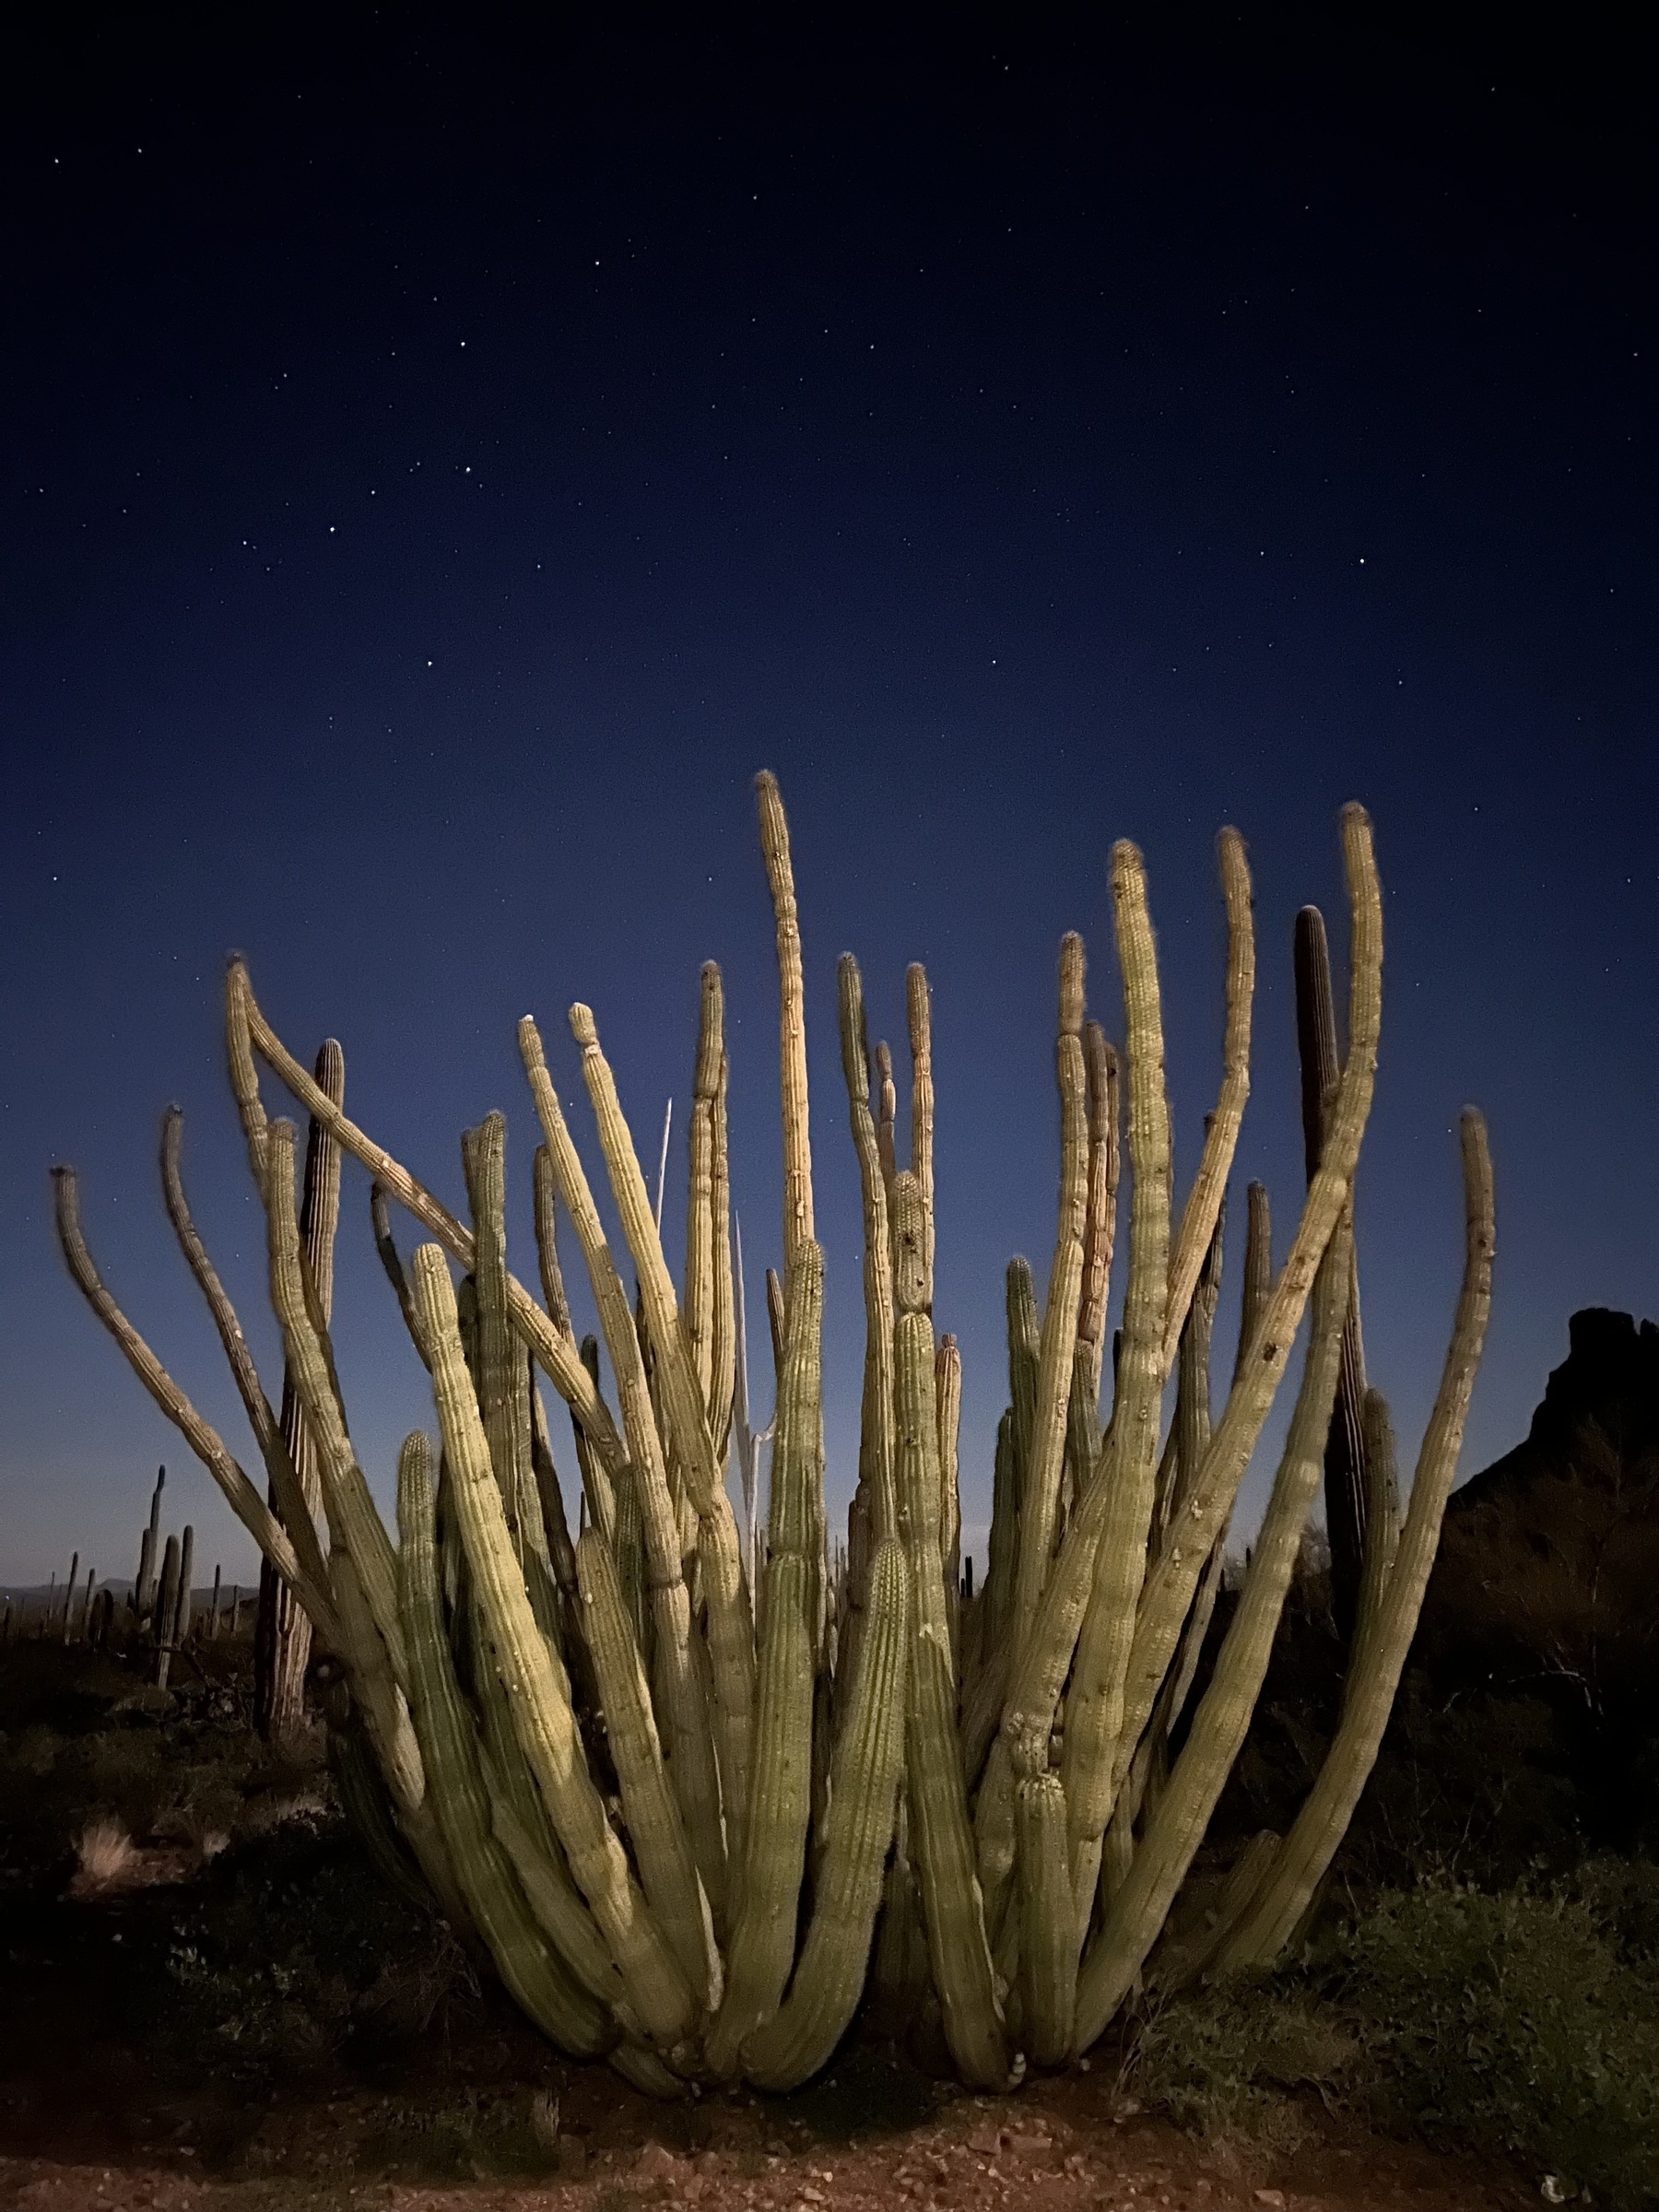 Starry night scene with a FUCKING GORGEOUS organ pipe cactus lit by moonlight stealing the scene.